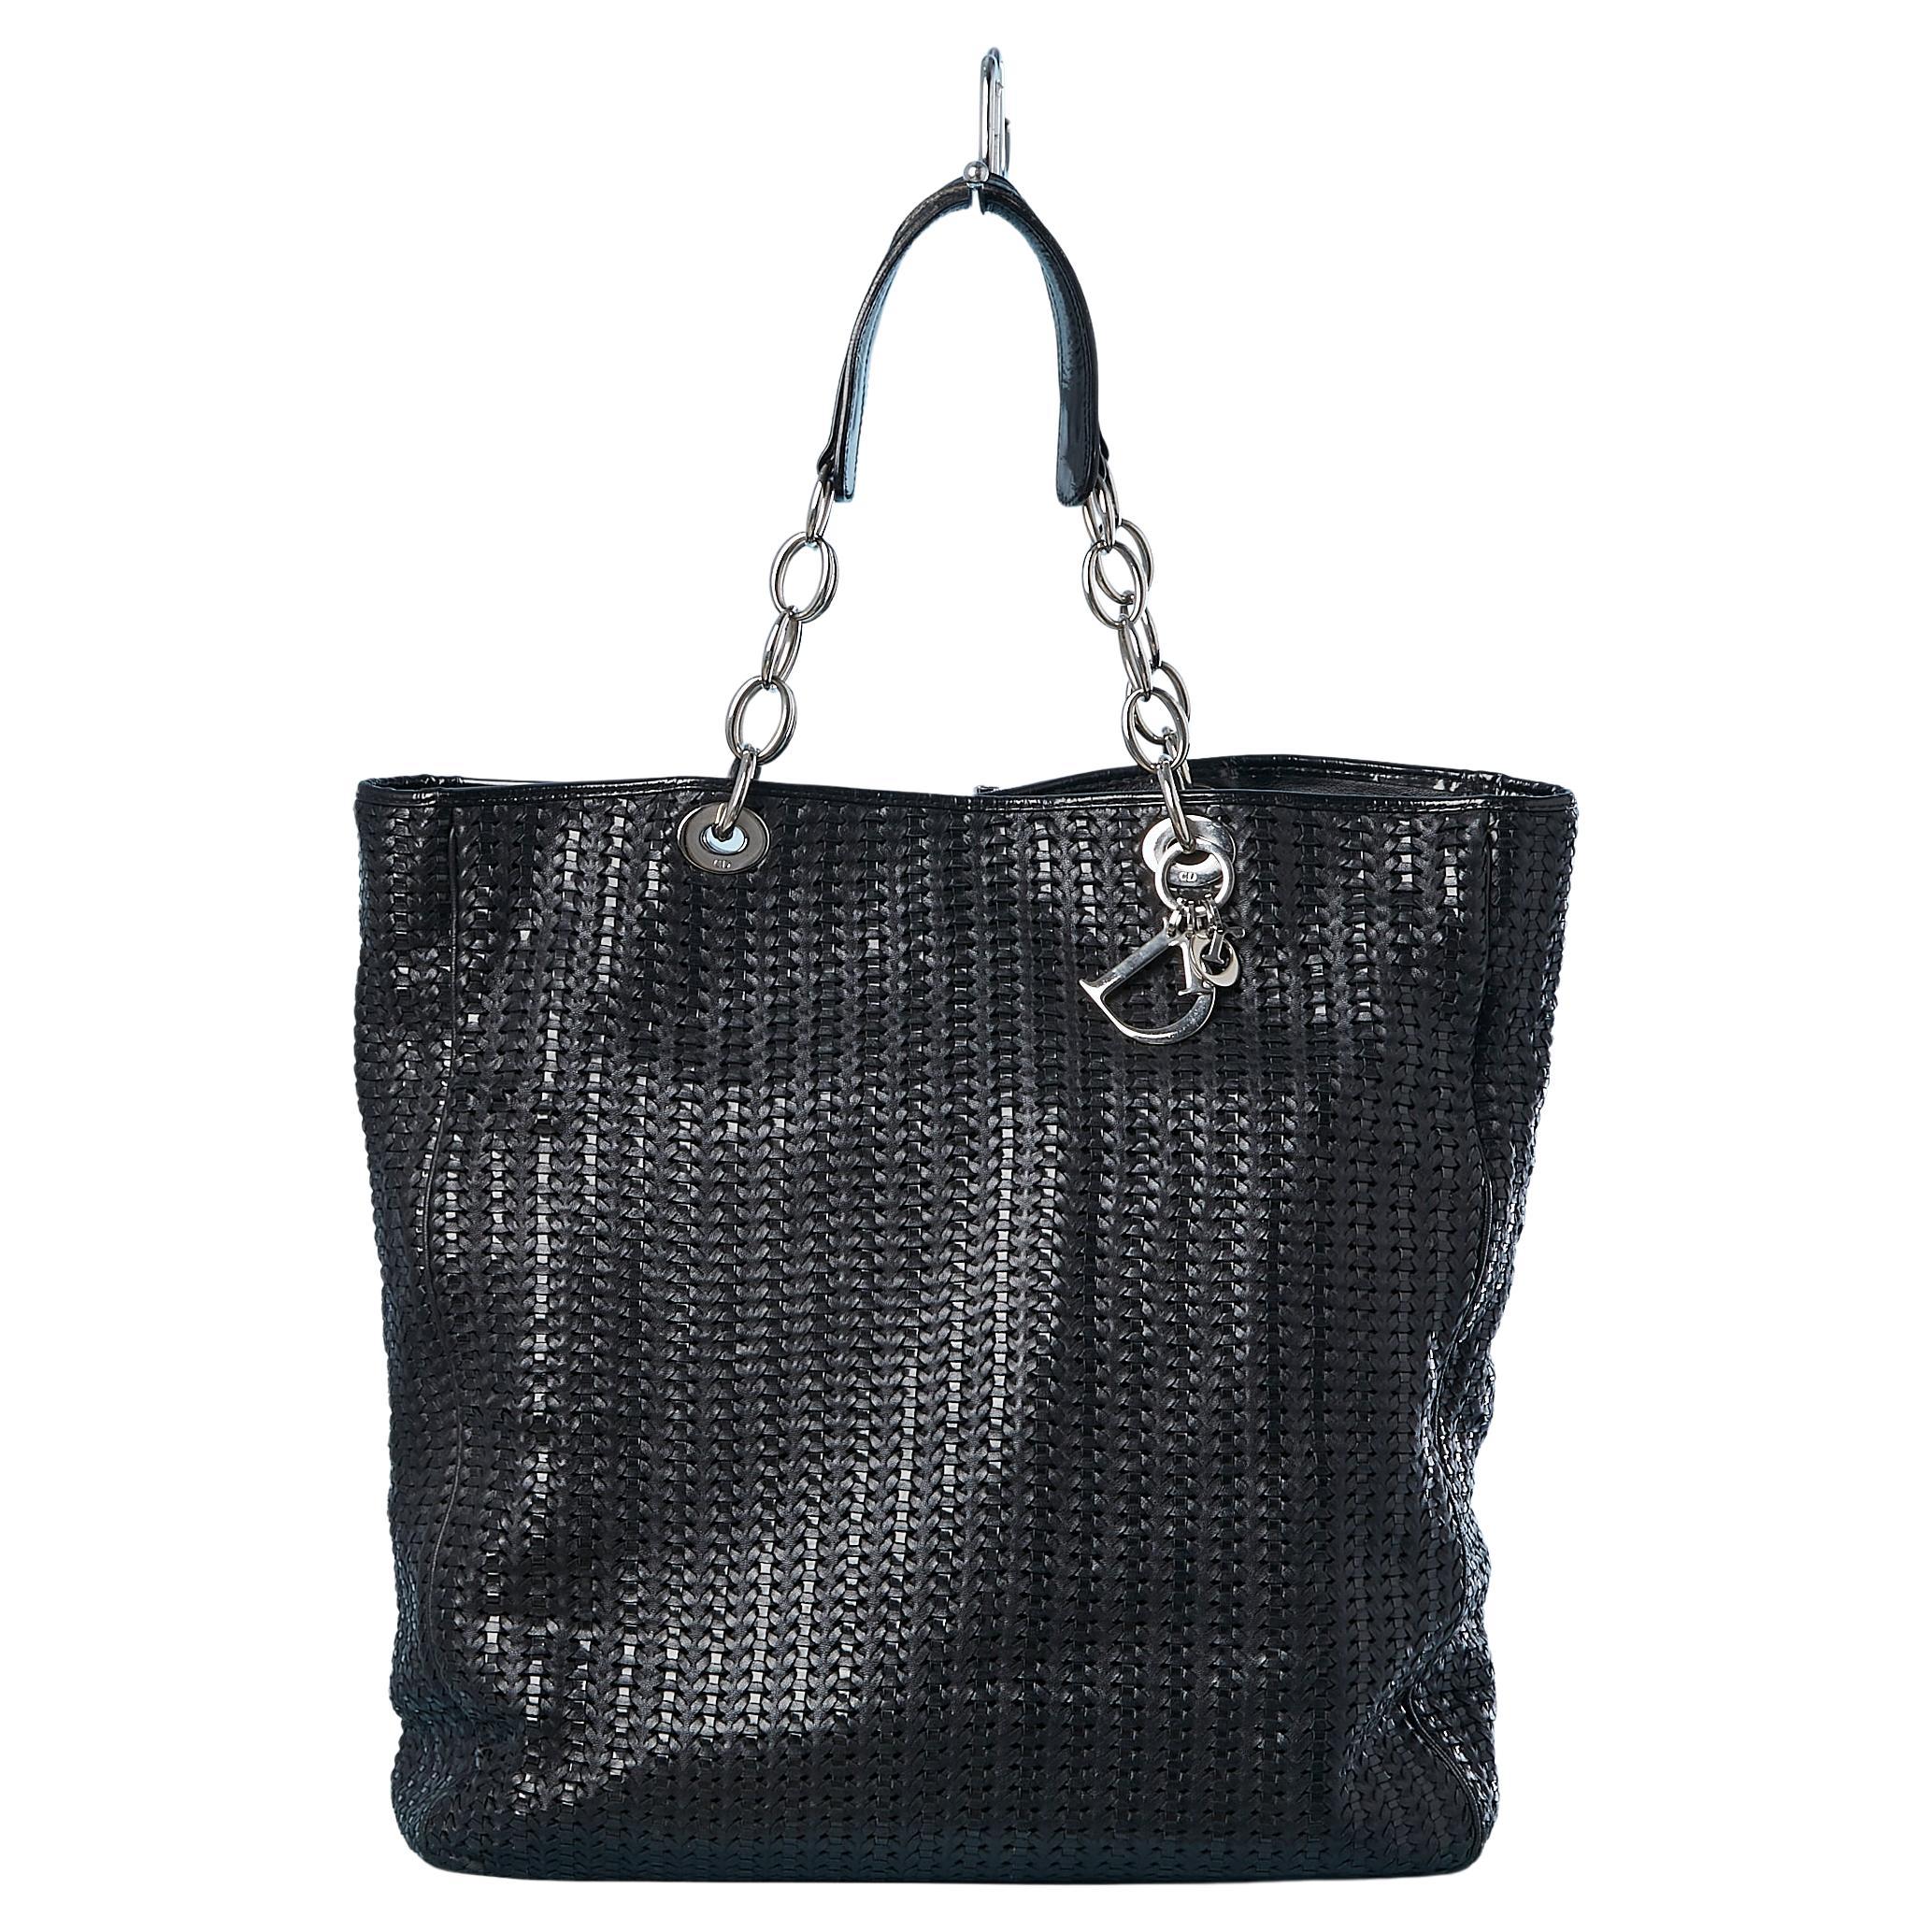 Mix black leather & patent leather plaited tote bag with chains Christian Dior 